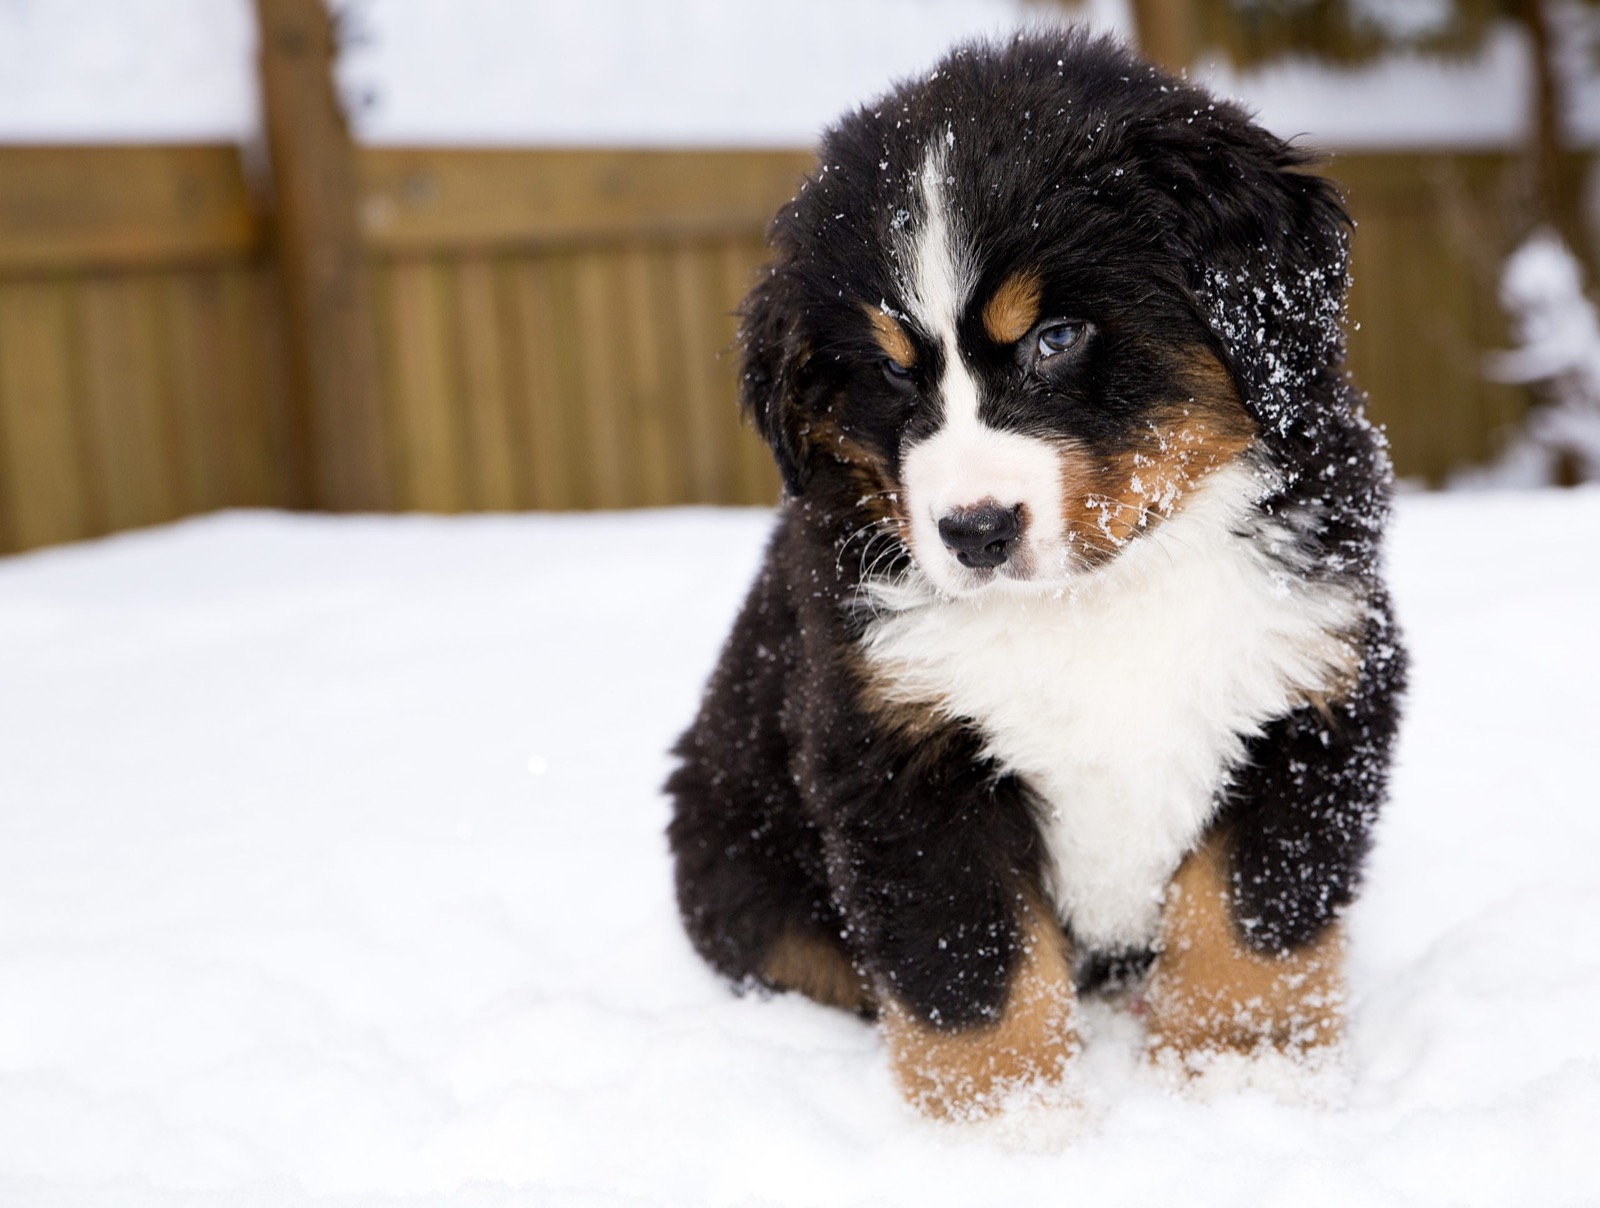 This 🐕 Dog Breeds Quiz May Be a Liiiittle Challenging, But Let’s See If You Can Score 15/20 Bernese Mountain Dog Puppy